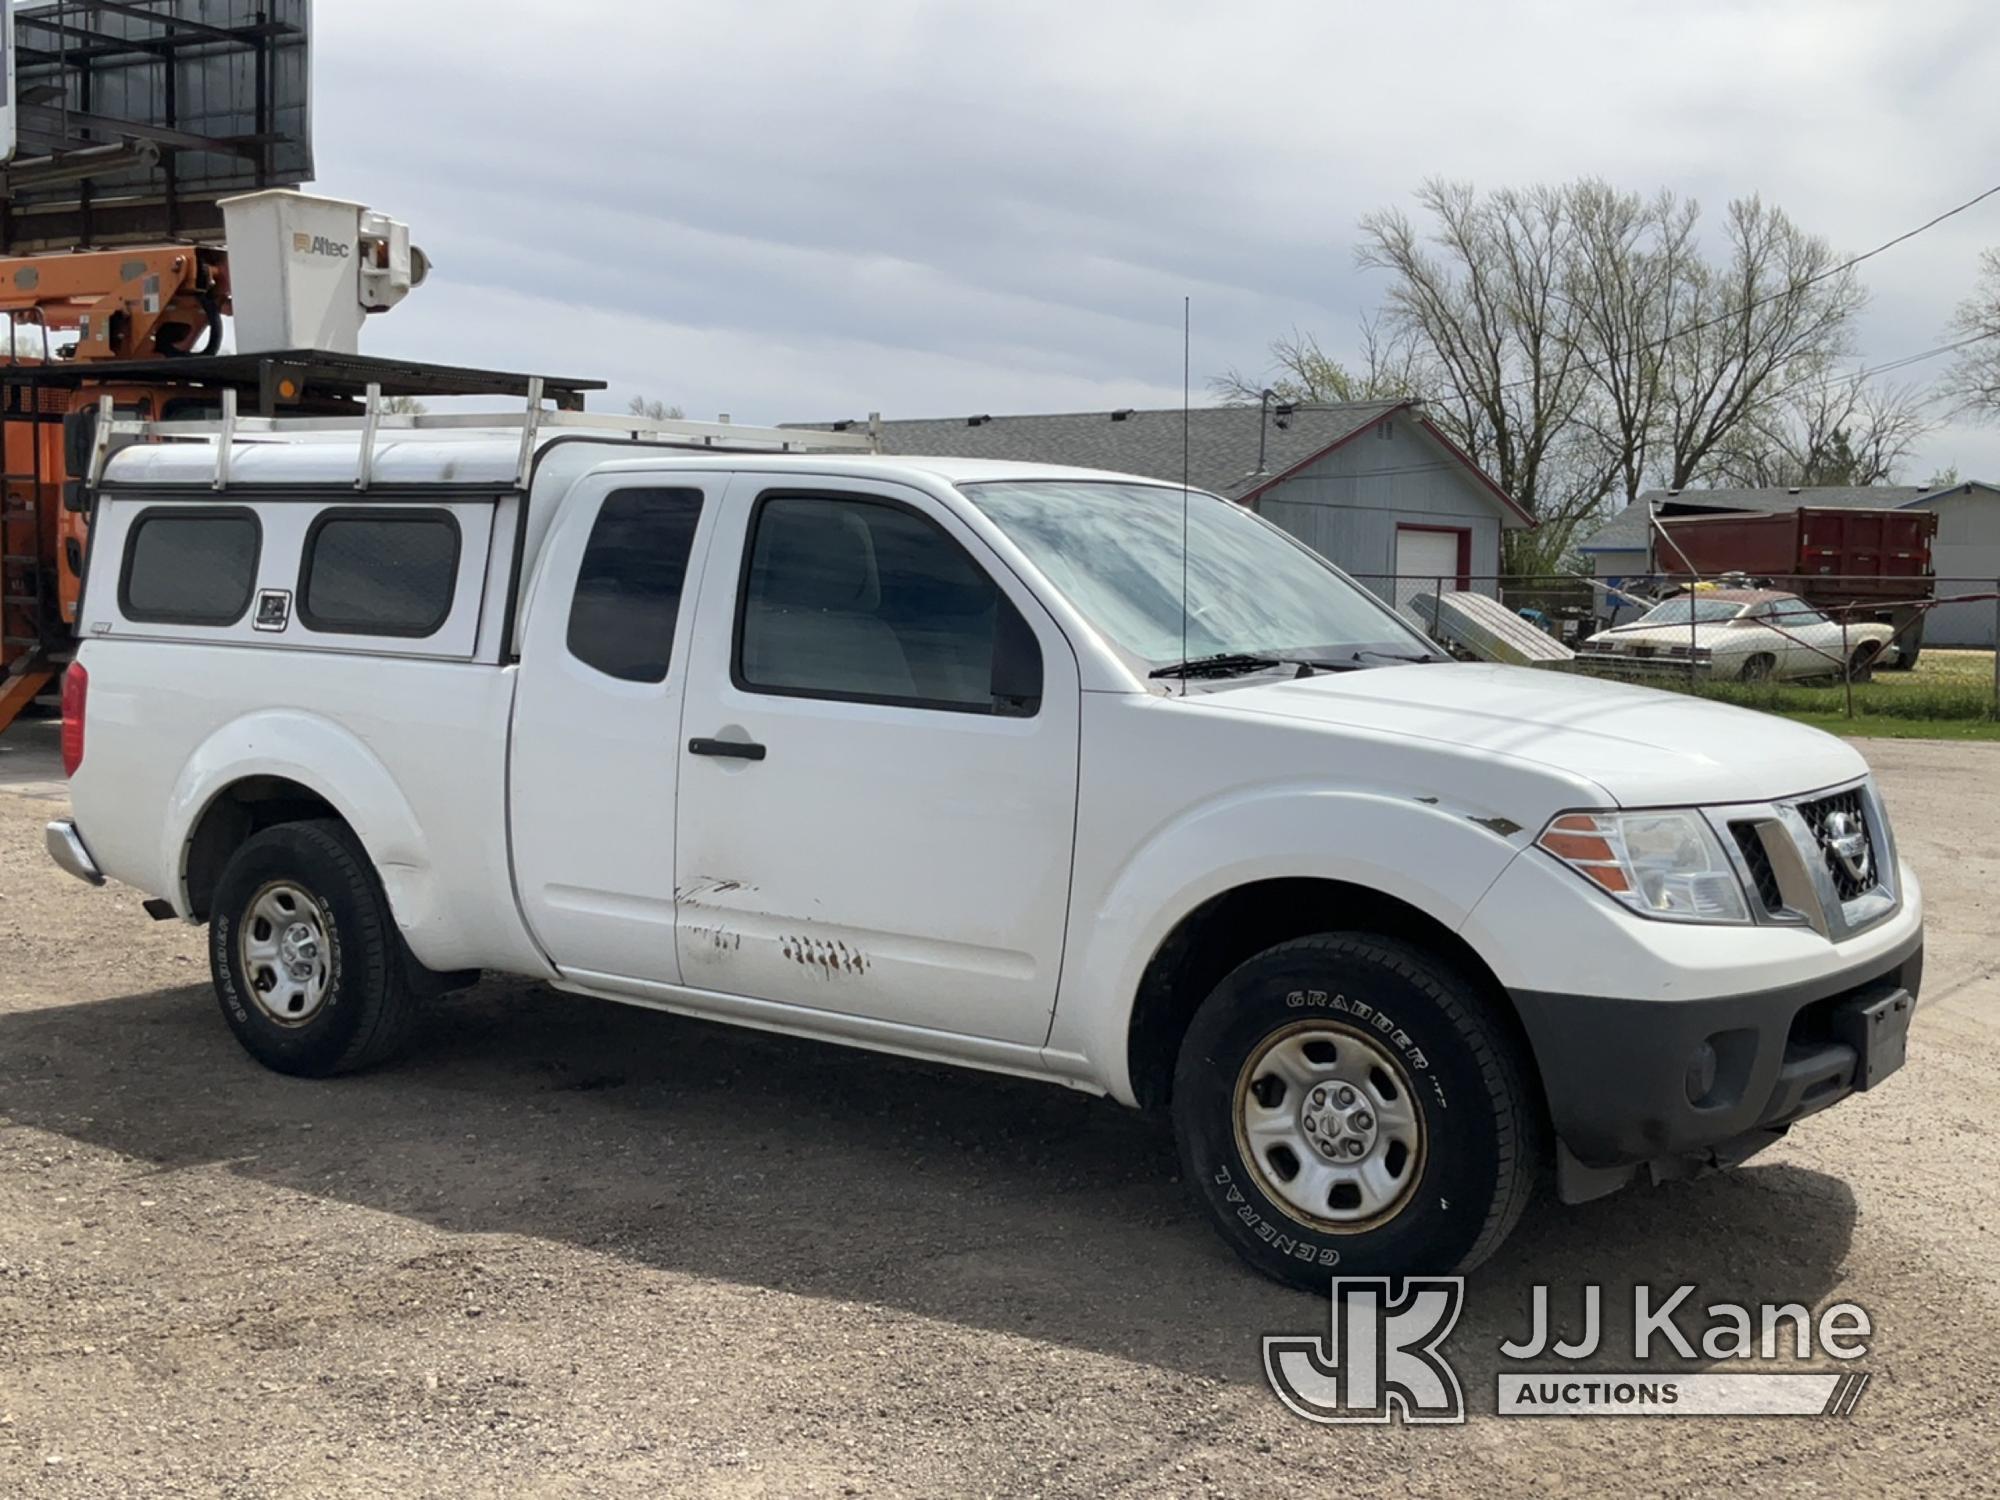 (South Beloit, IL) 2016 Nissan Frontier Extended-Cab Pickup Truck Runs & Moves) (Body/Paint Damage,